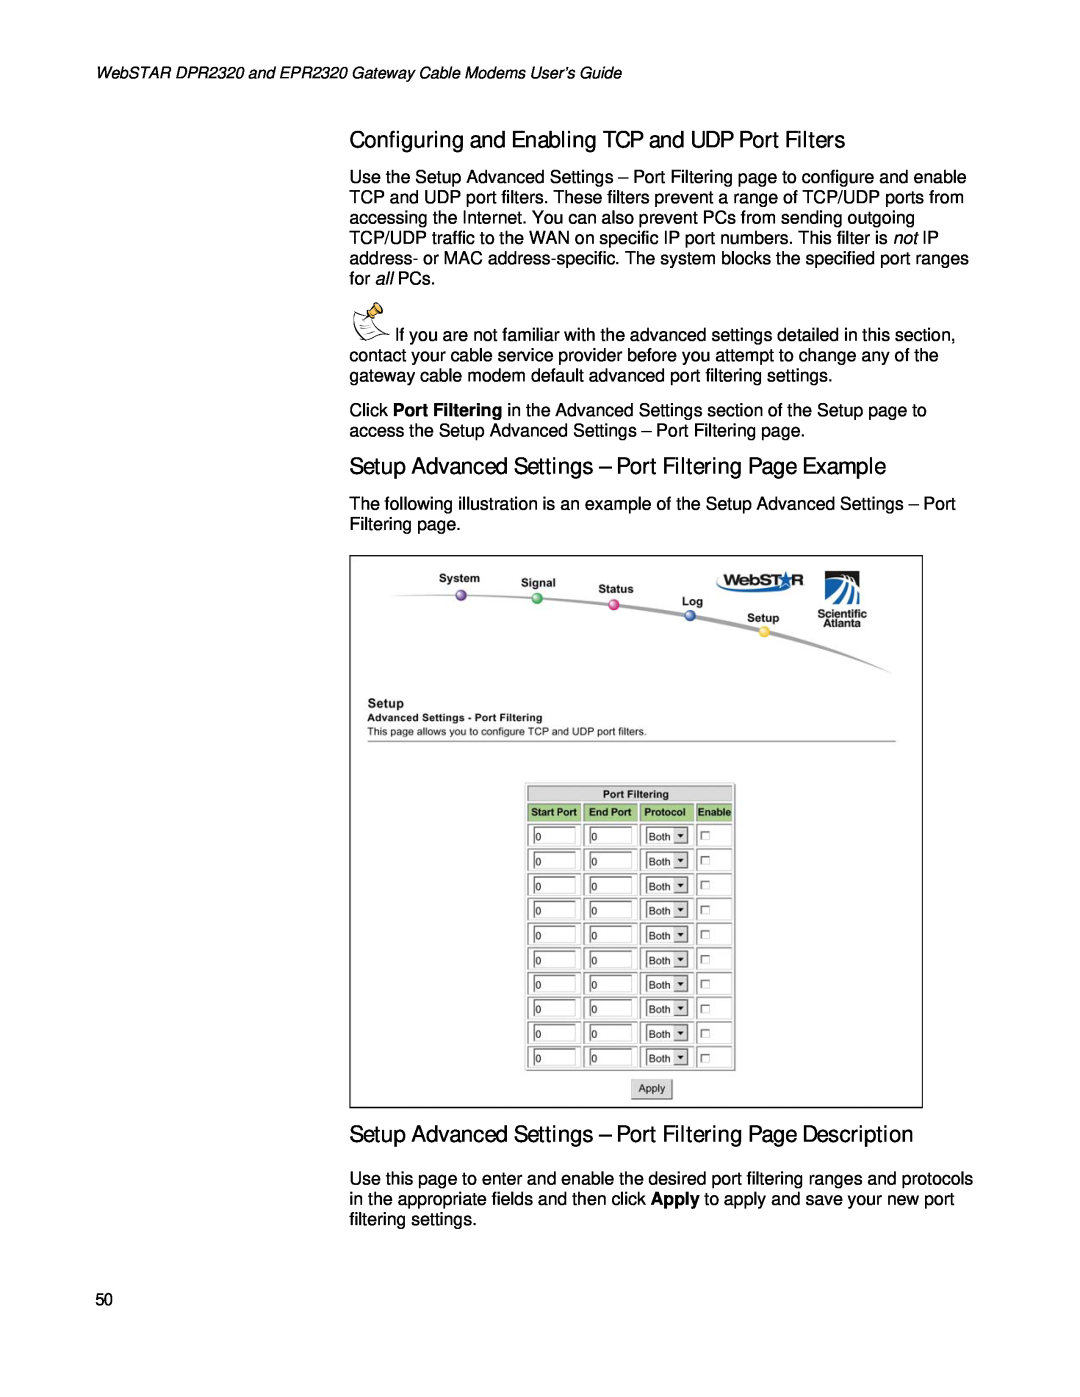 Apple DPR2320TM Configuring and Enabling TCP and UDP Port Filters, Setup Advanced Settings - Port Filtering Page Example 